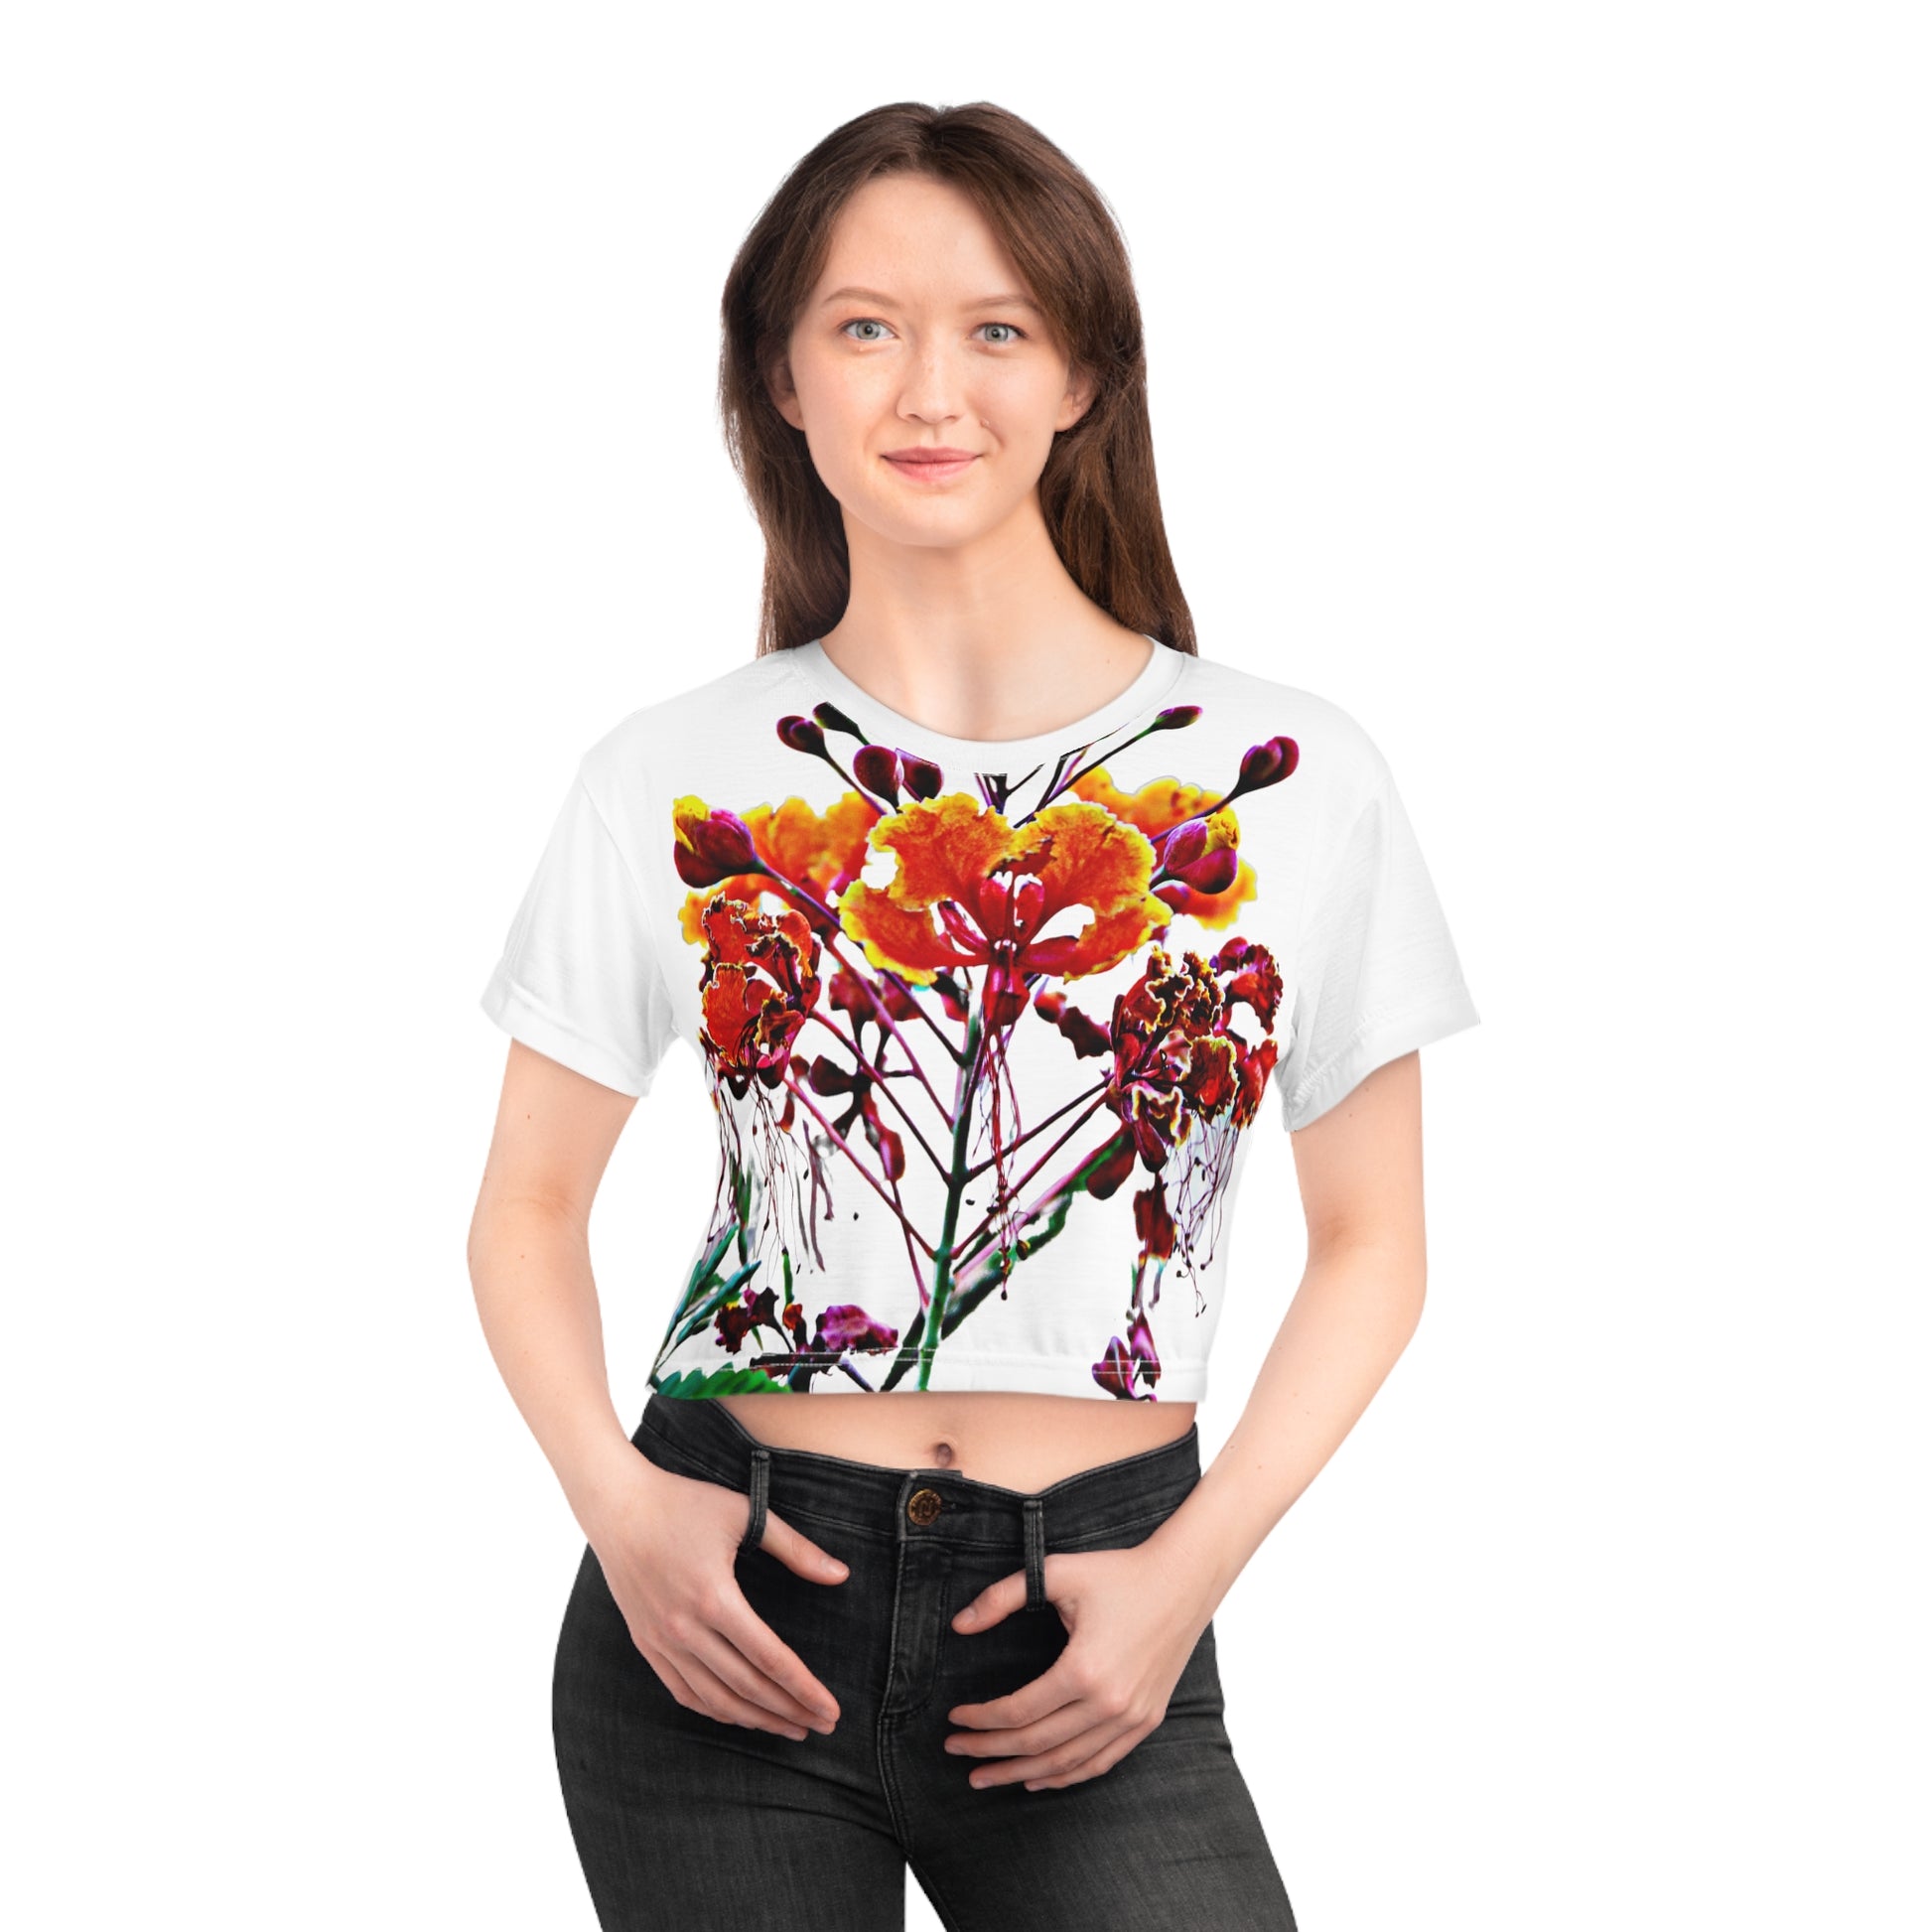 This personalized crop top has both comfort and style in spades. Add whimsical patterns, feel-good designs and create a unique AOP crop tee that’s perfect for everyday wear. Made 100% with silky soft polyester that is both lightweight and breath